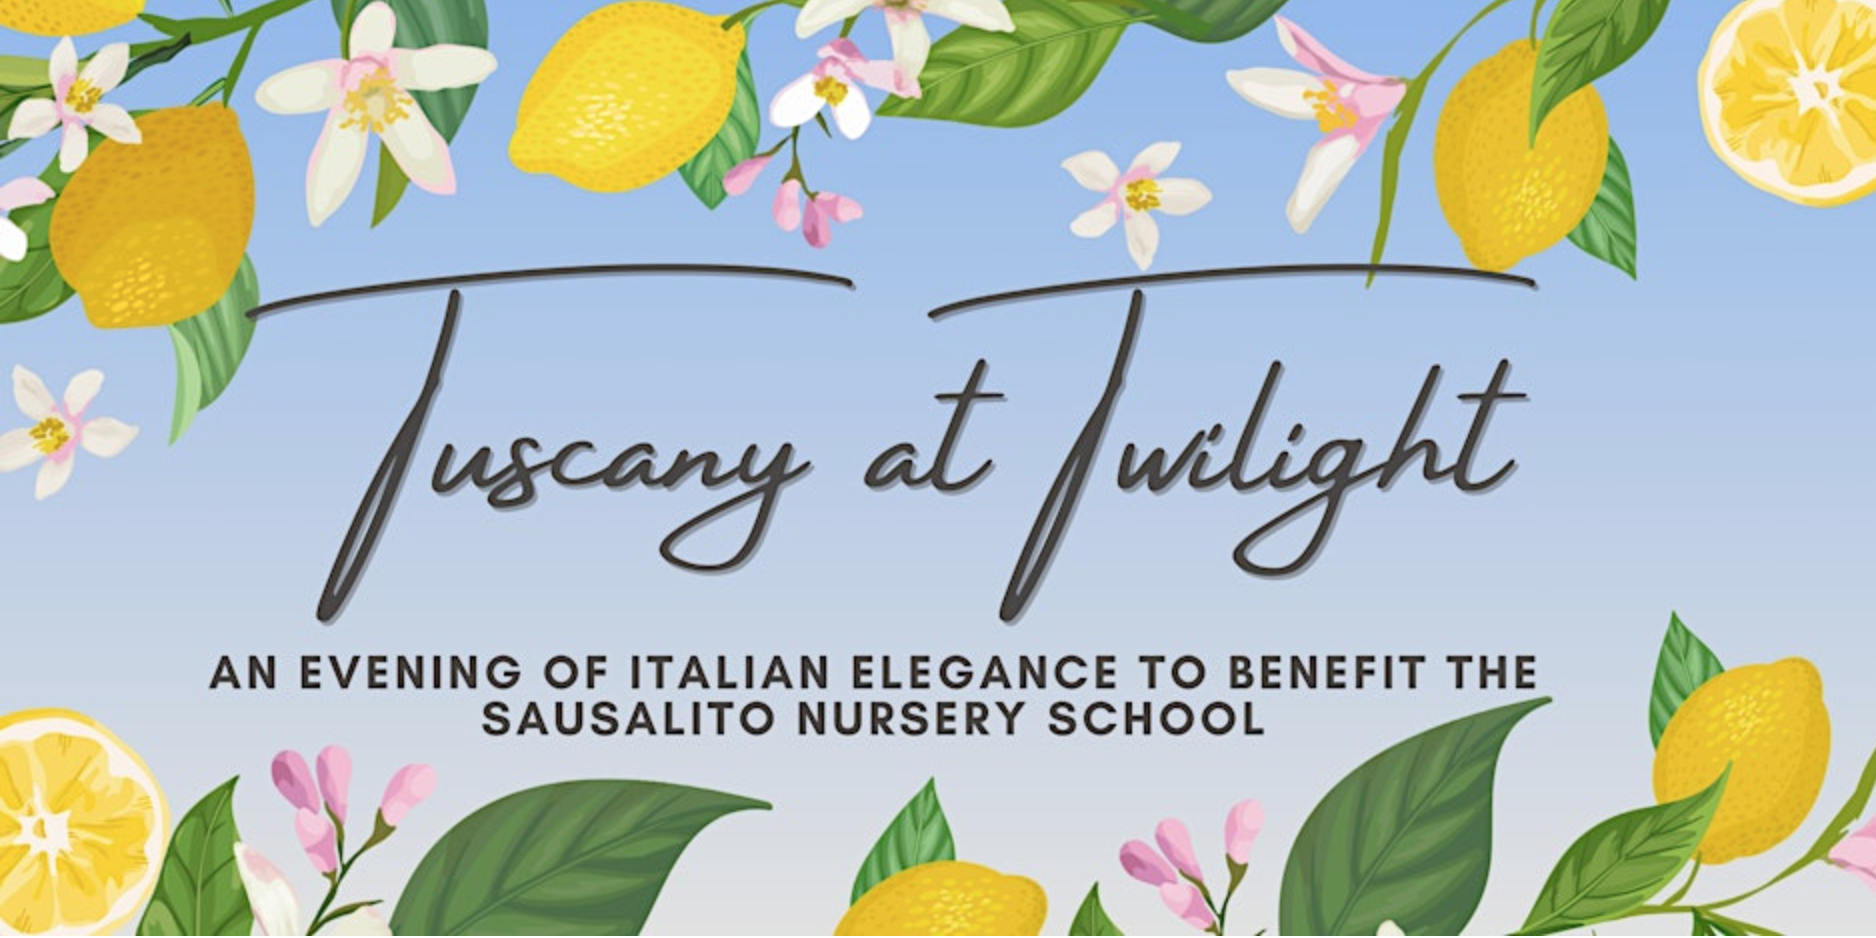 An evening of Italian elegance and giving to benefit the Sausalito Nursery School. Hosted at the Sausalito Woman's Club.